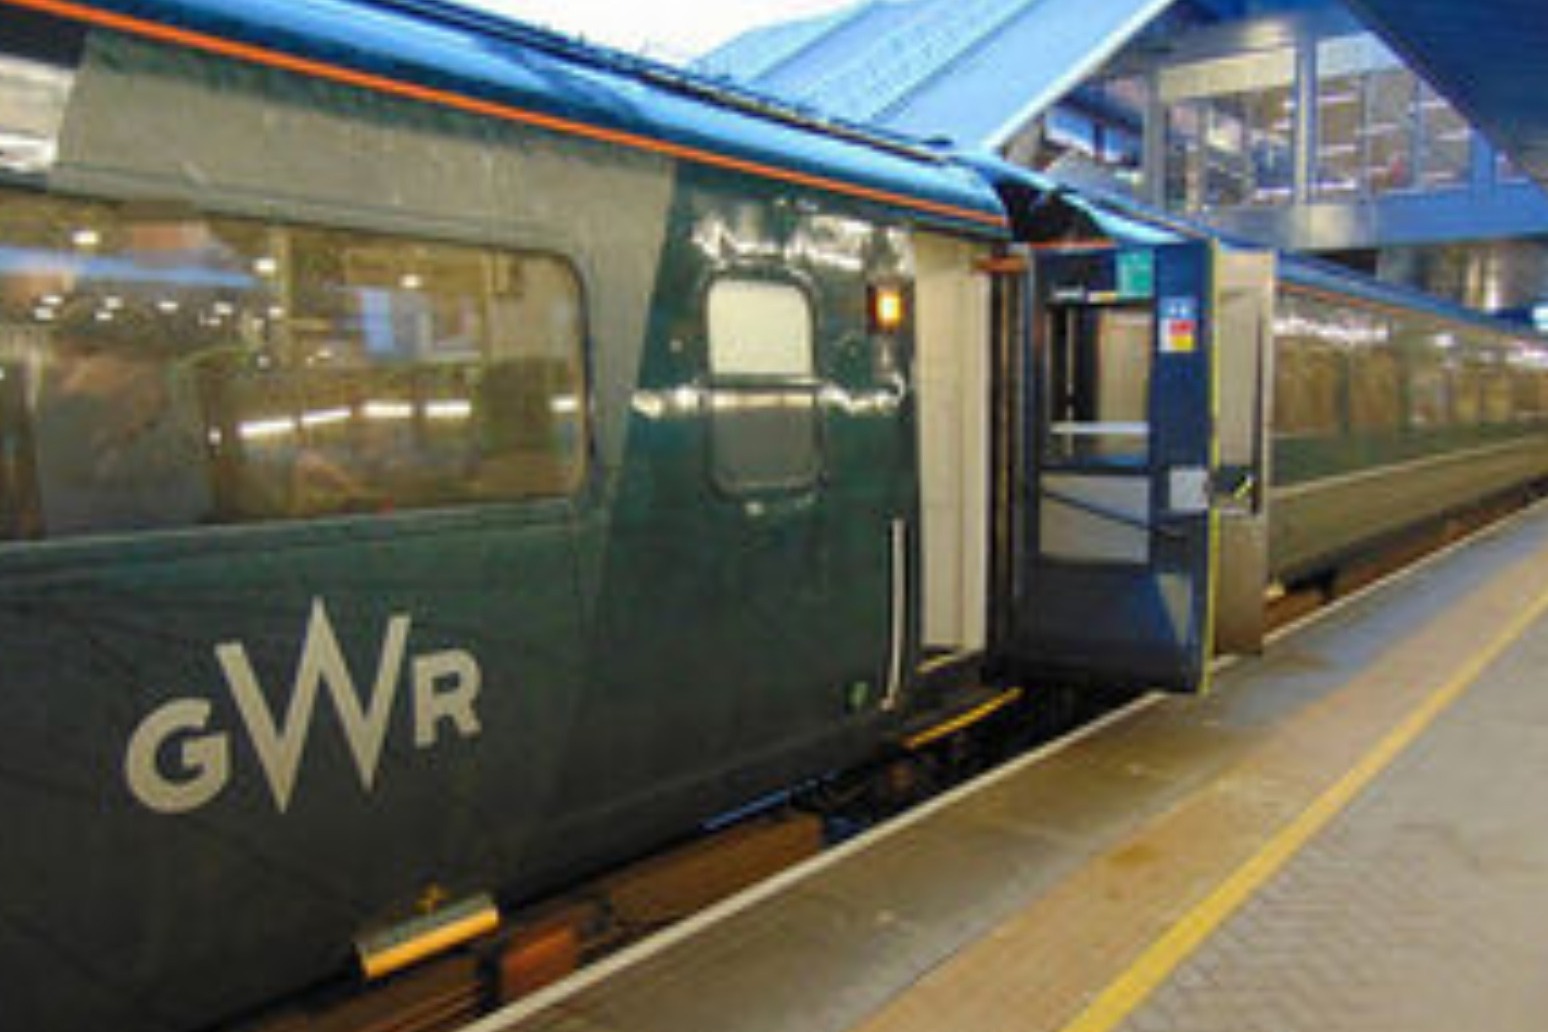 WOMAN DIED LEANING FROM TRAIN WINDOW BELOW INADEQUATE WARNING SIGN - REPORT 